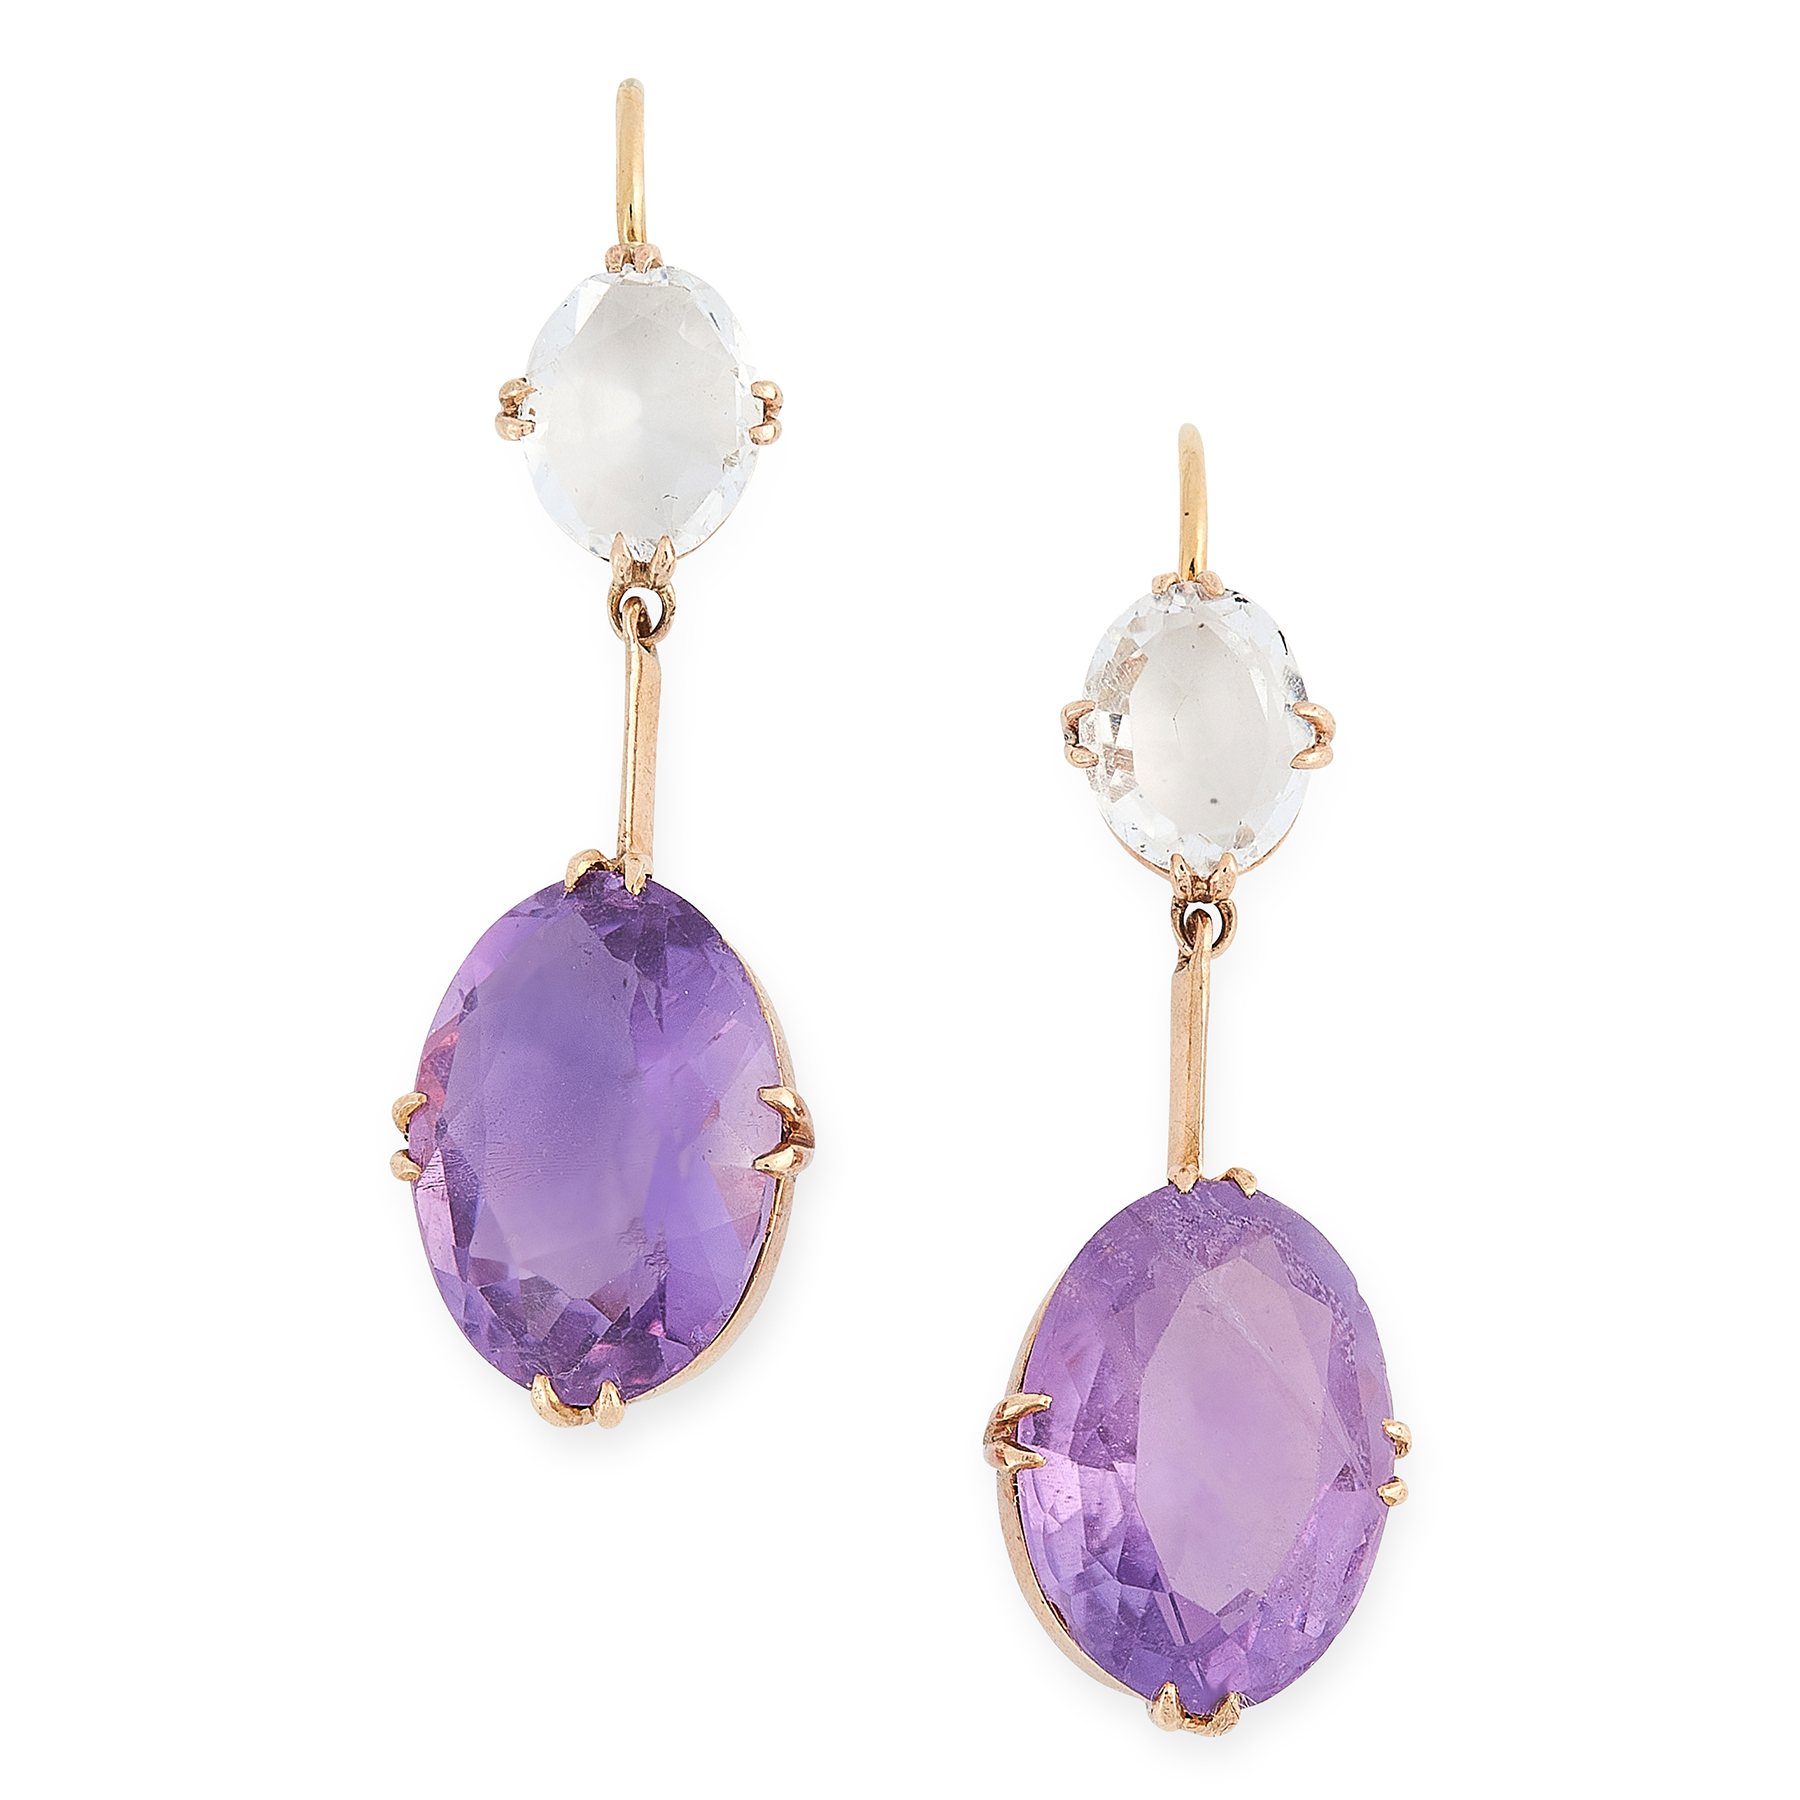 A PAIR OF ANTIQUE AMETHYST AND ROCK CRYSTAL EARRINGS in yellow gold, each set with an oval cut